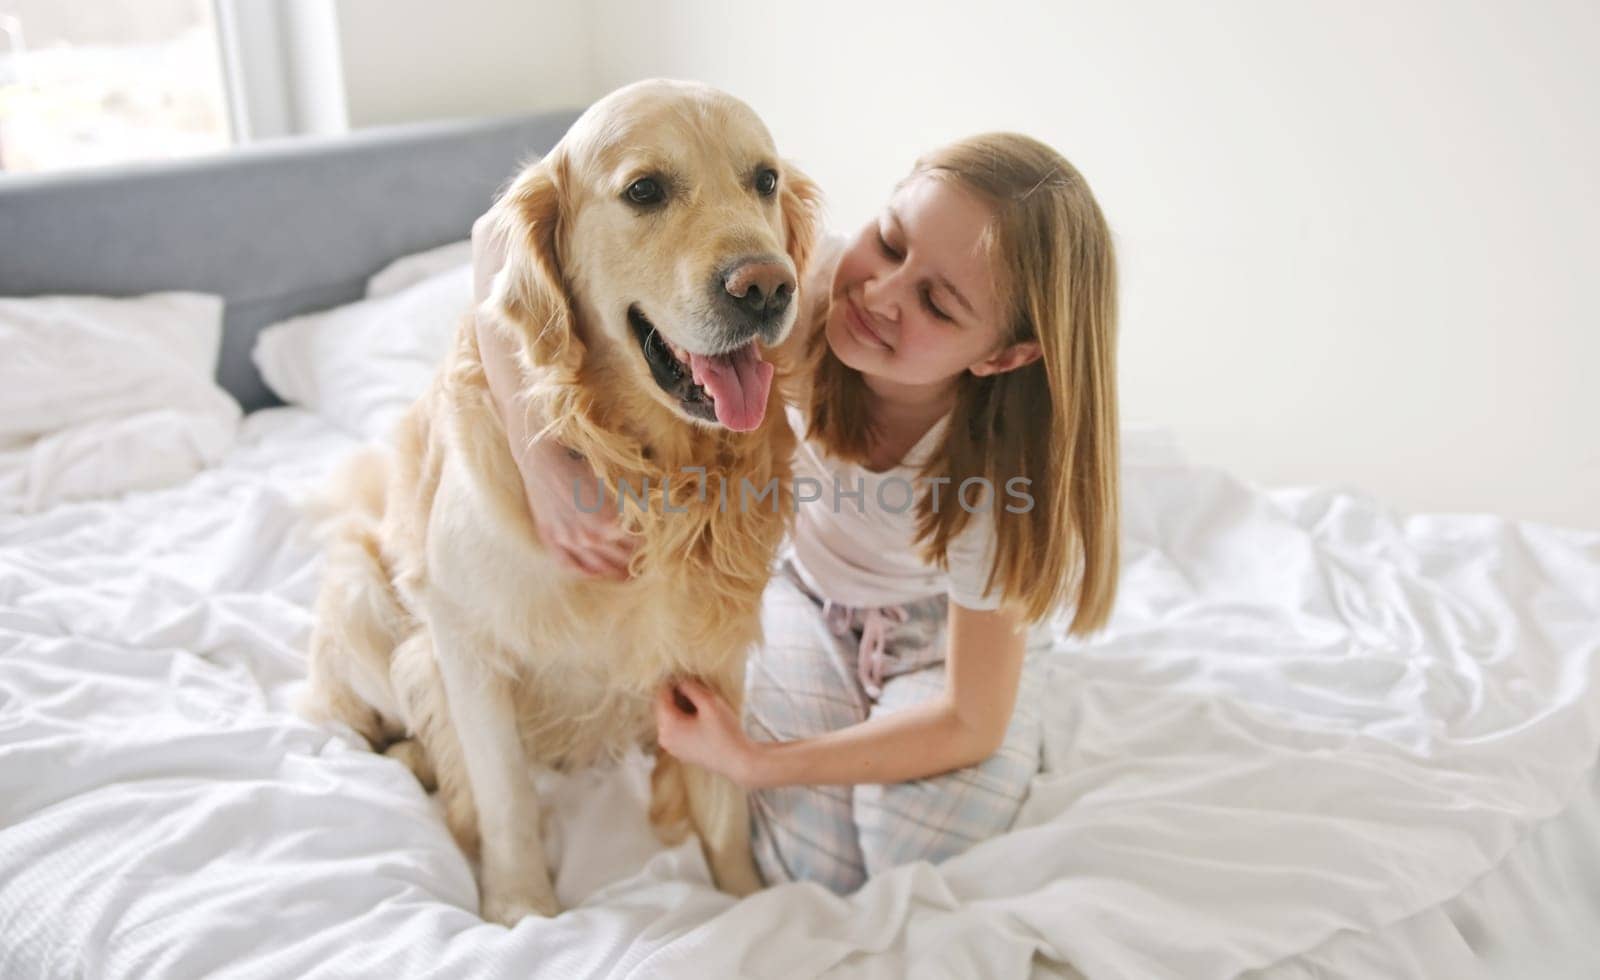 Sweet Little Girl Embracing A Lovely Golden Retriever Dog On A Bed In The Morning